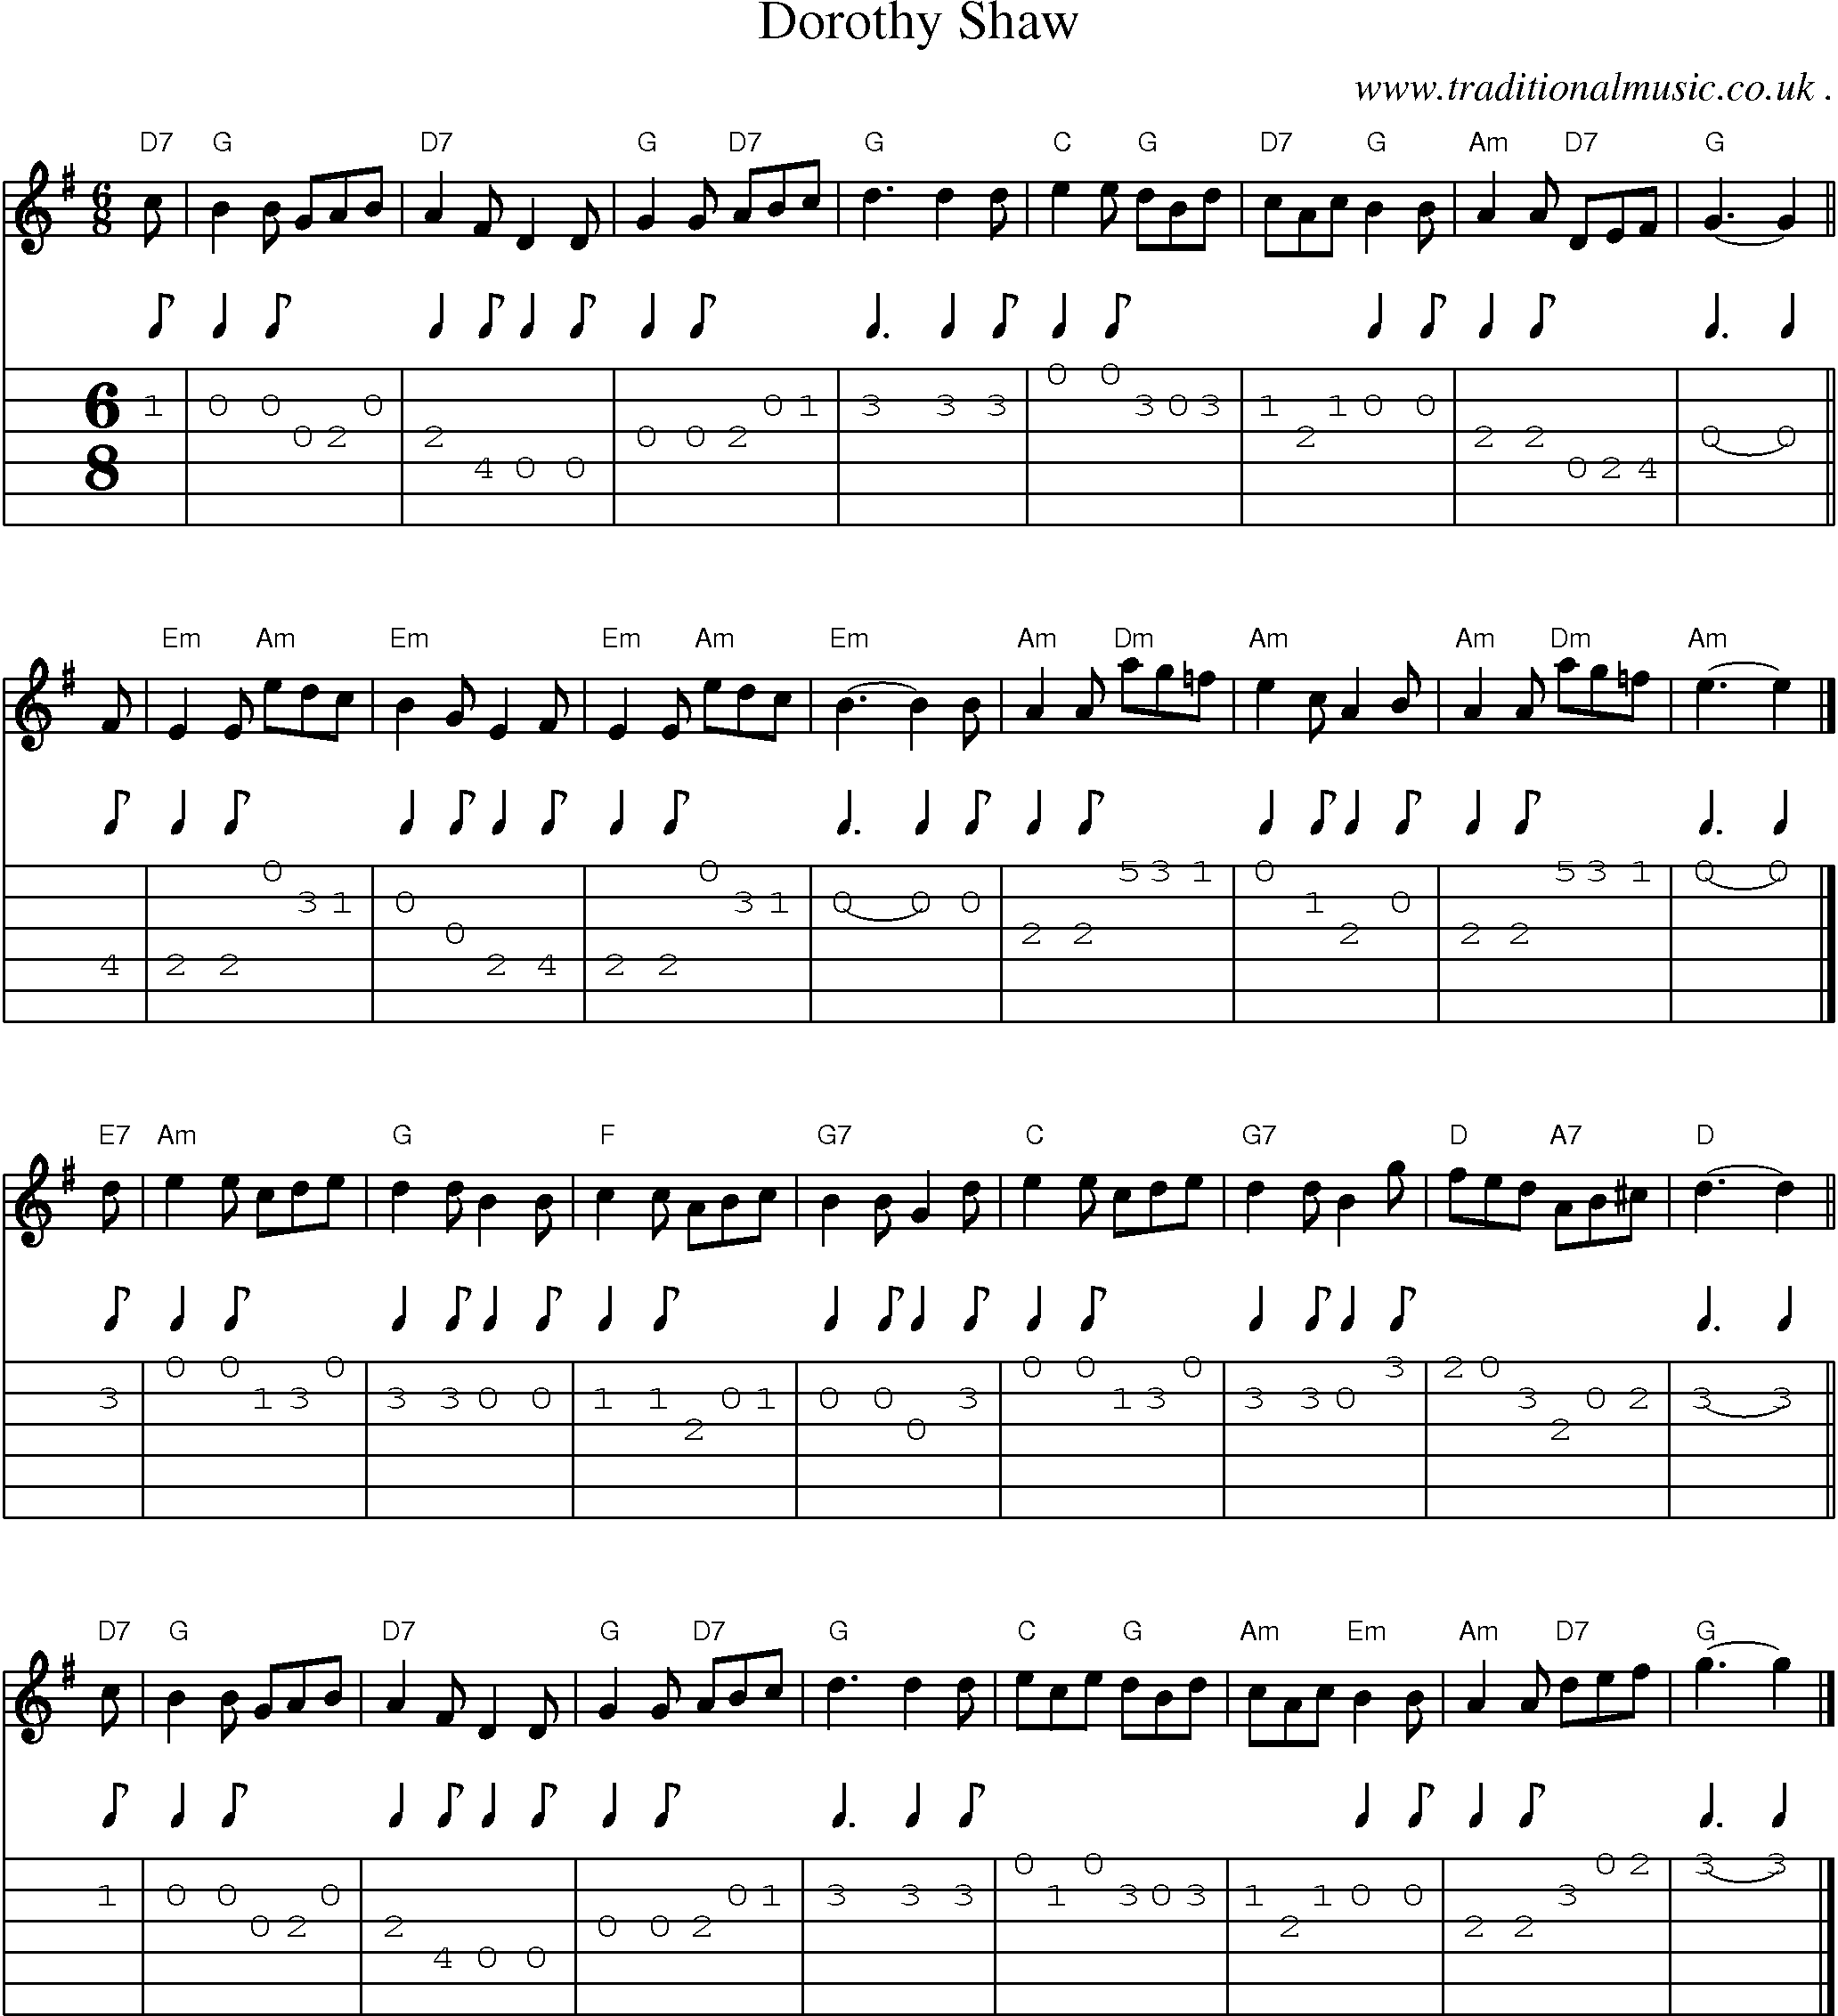 Sheet-music  score, Chords and Guitar Tabs for Dorothy Shaw